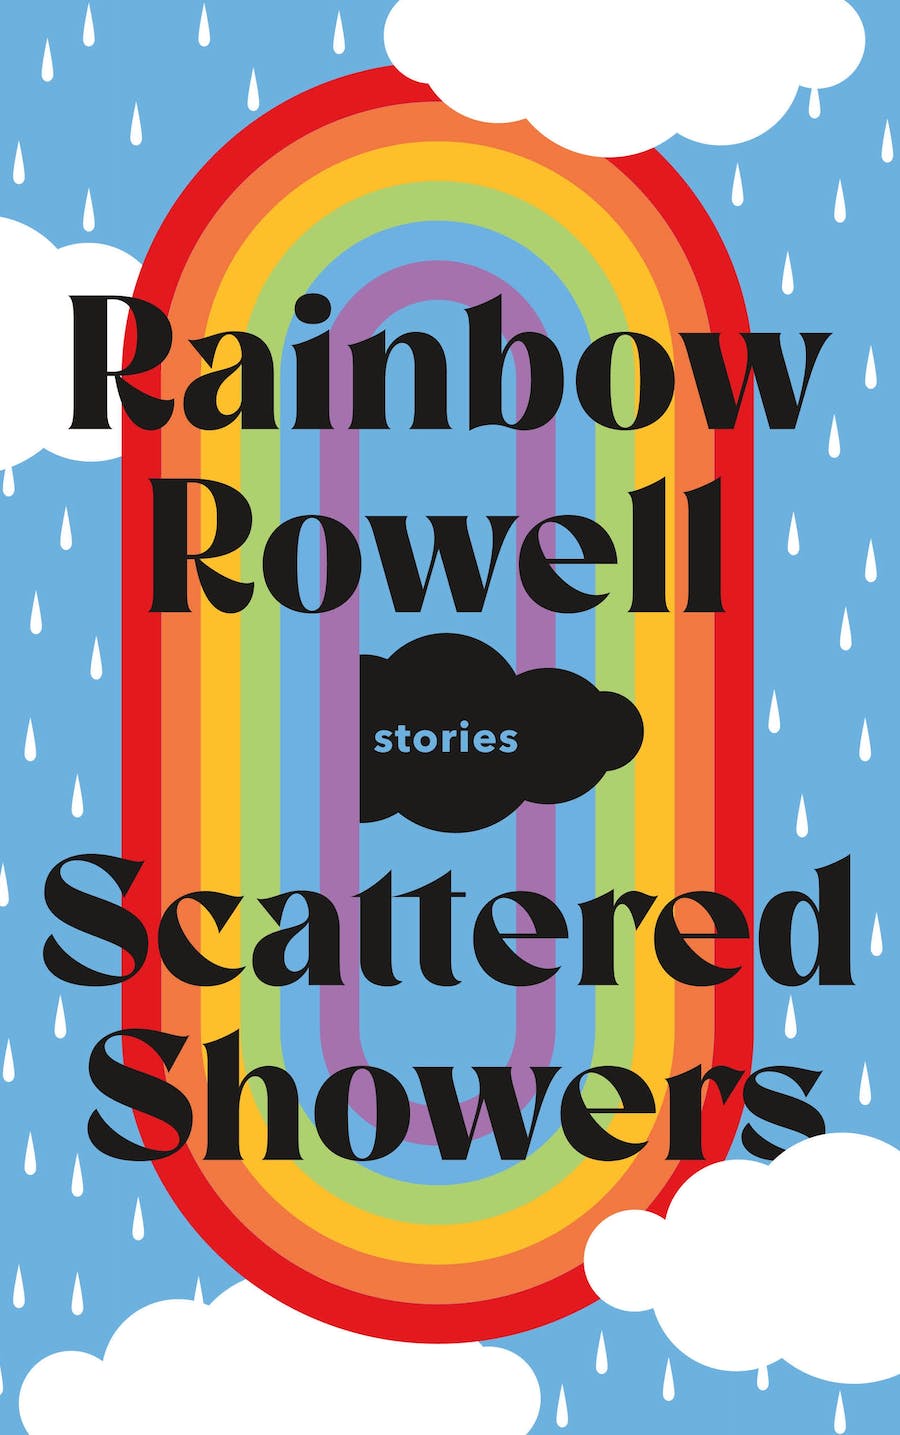 BOOK EVENT: Scattered Showers by Rainbow Rowell